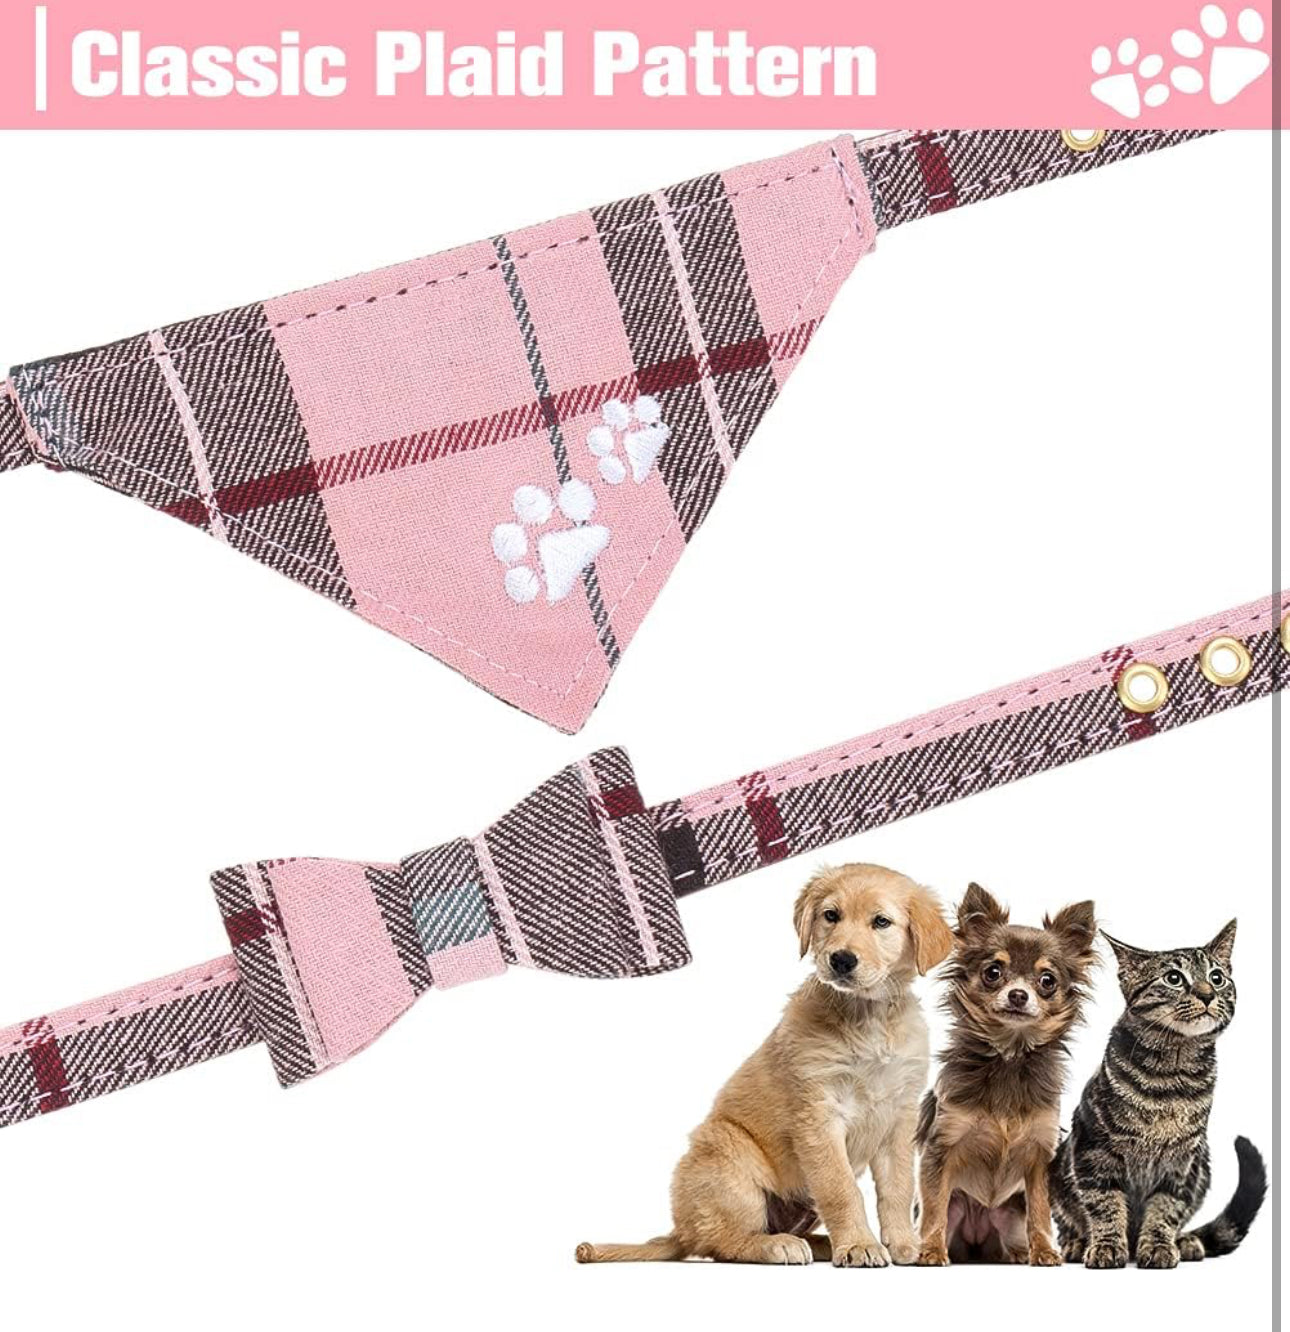 EXPAWLORER Dog Leash Collar Set - 3 Pack Embroidery Pawprints Plaid Dog Collars and Leash Tangle Free, Bow Tie and Bandana Collar with Bell, size small